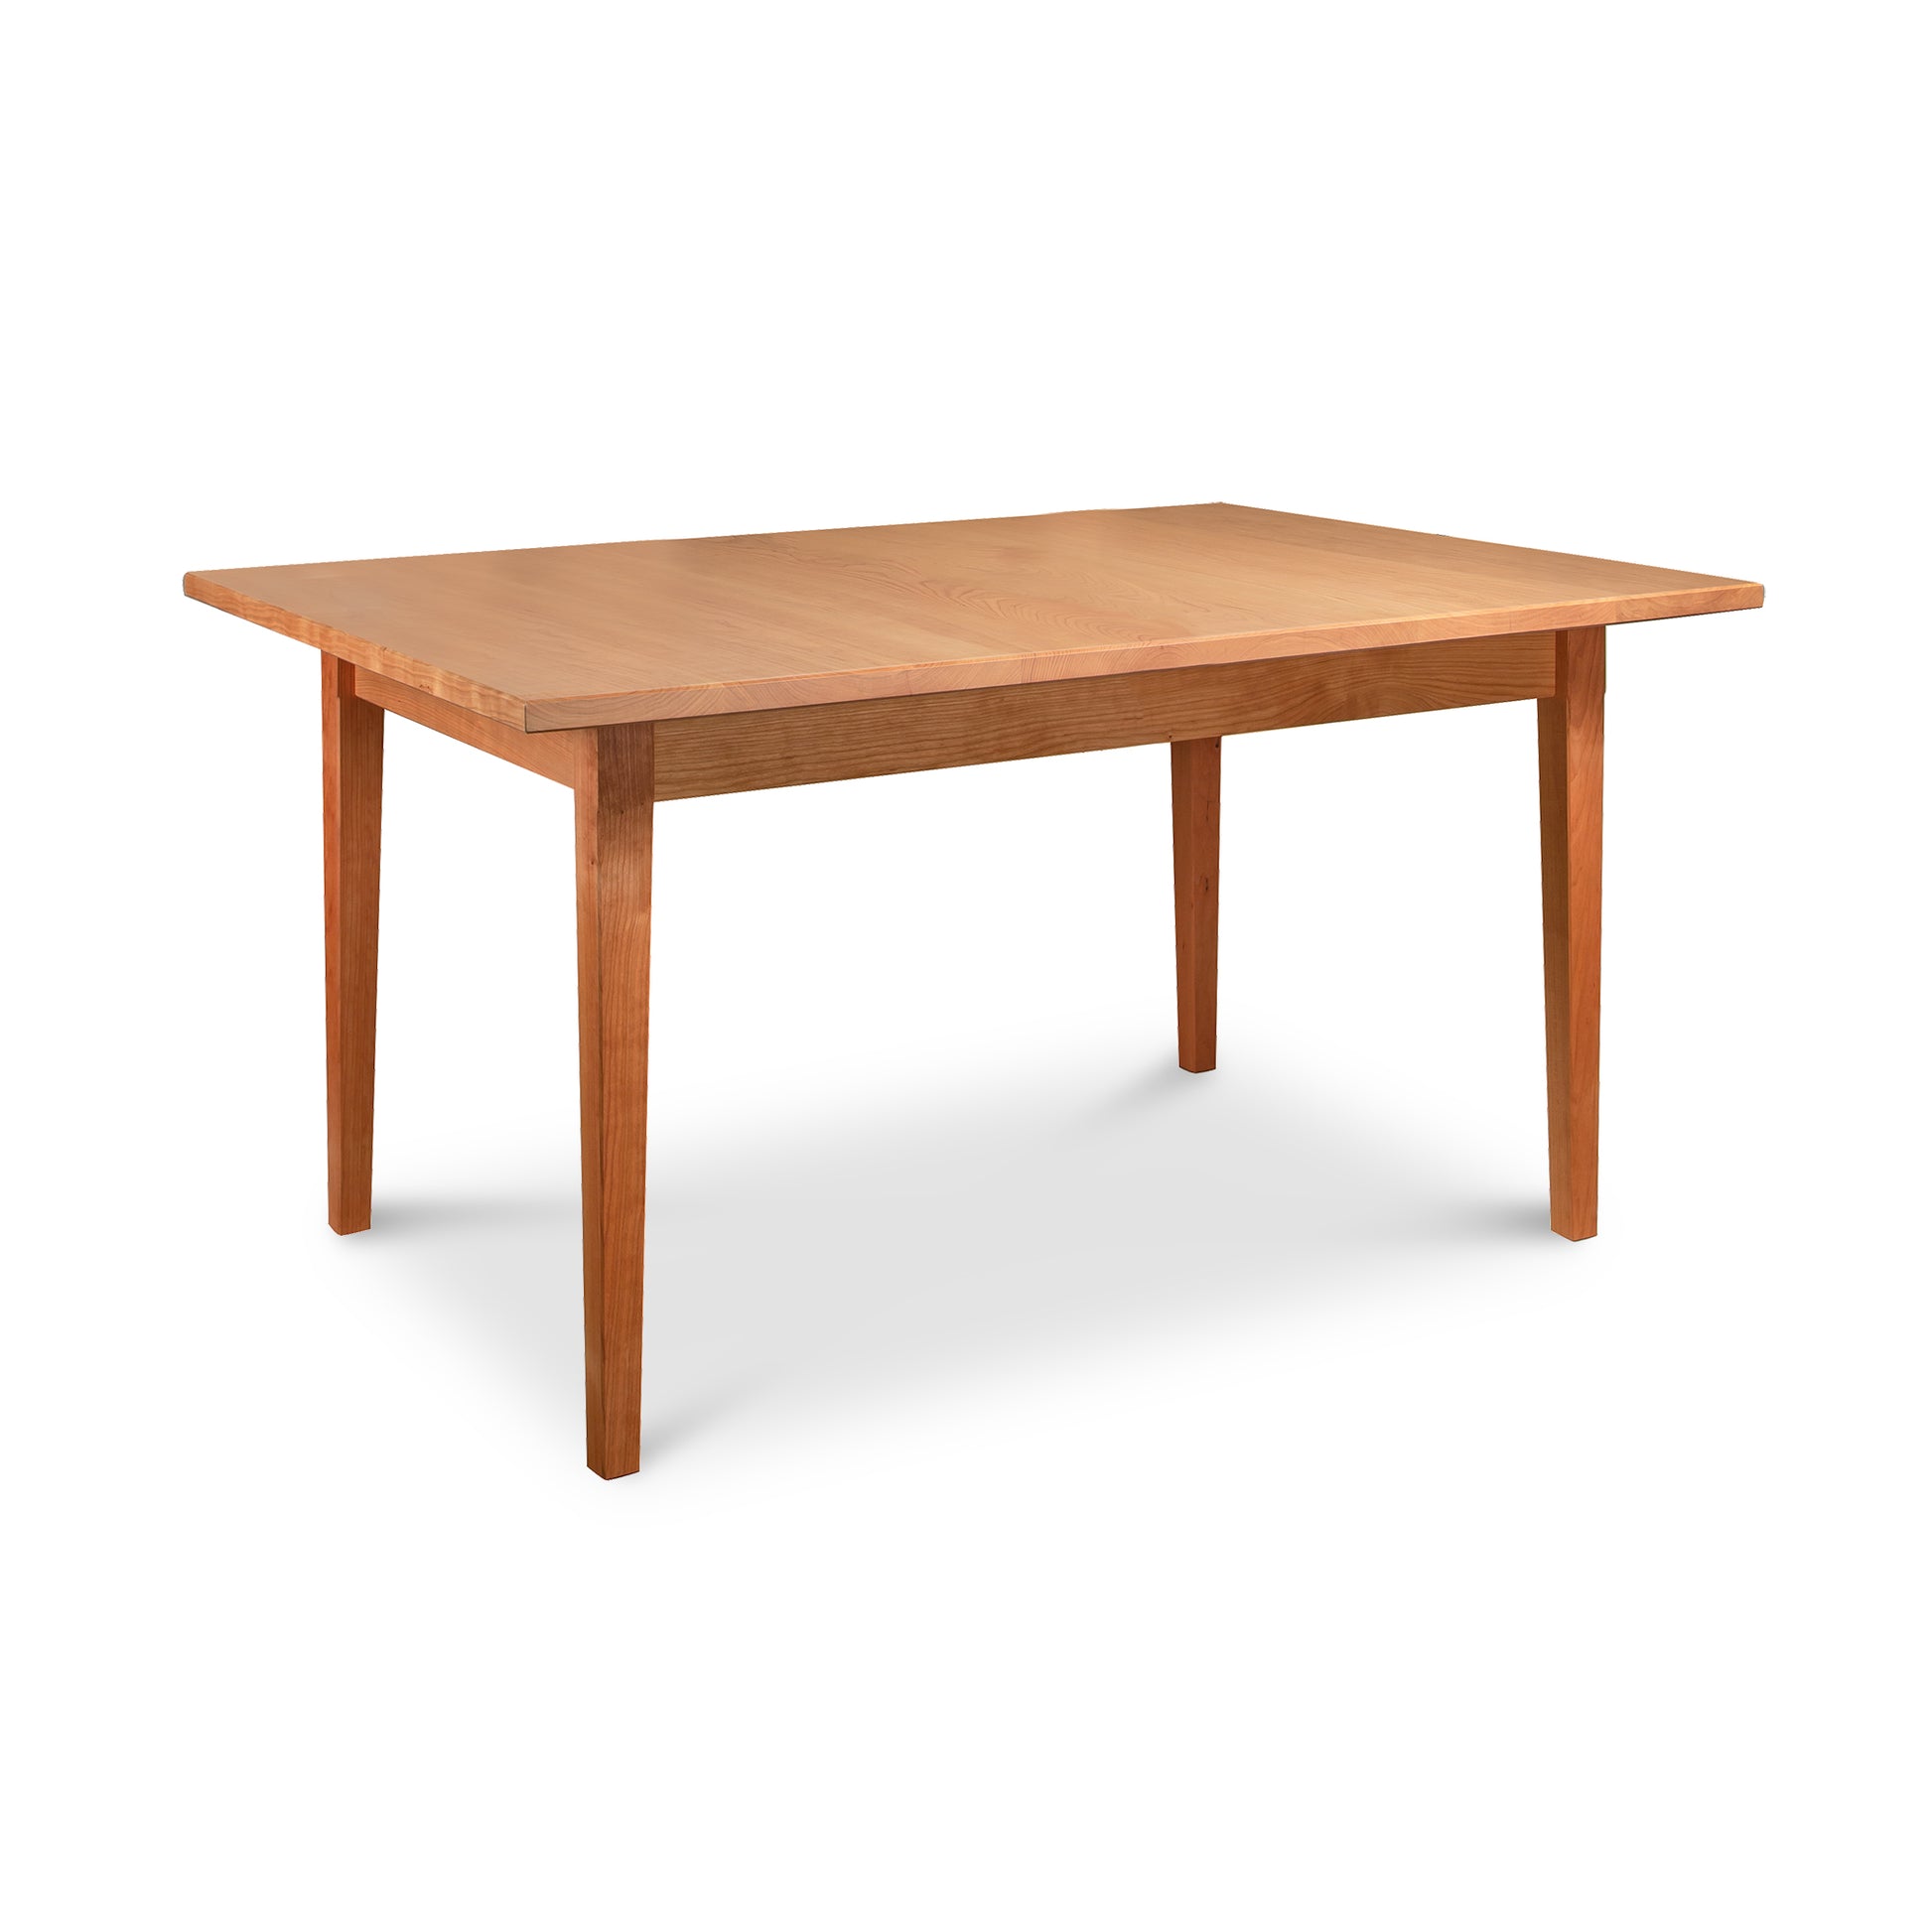 Alt Text: "Vermont Shaker Rectangular Solid Top Dining Table made from sustainably harvested wood by Maple Corner Woodworks. This American made, solid wood table features a smooth surface and minimalist design with four straight legs and a light-colored finish.